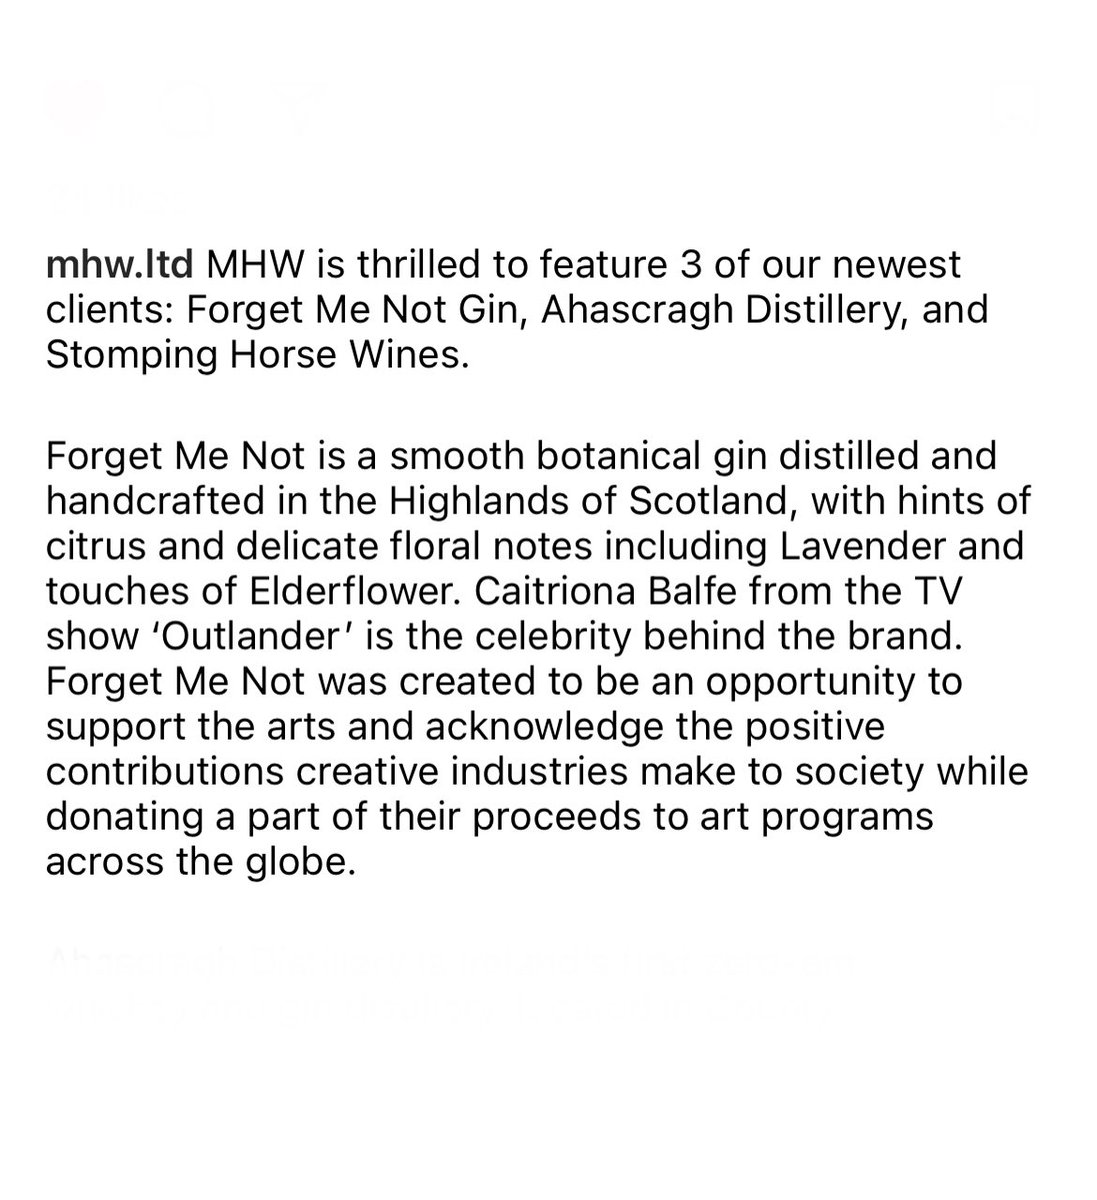 #CaitríonaBalfe #forgetmenotgin Update on @FMNGin and it’s new distributor. “Forget Me Not is not just a gin. It’s an opportunity to support the arts and acknowledge the positive contribution creative industries make to society” forgetmenot.com